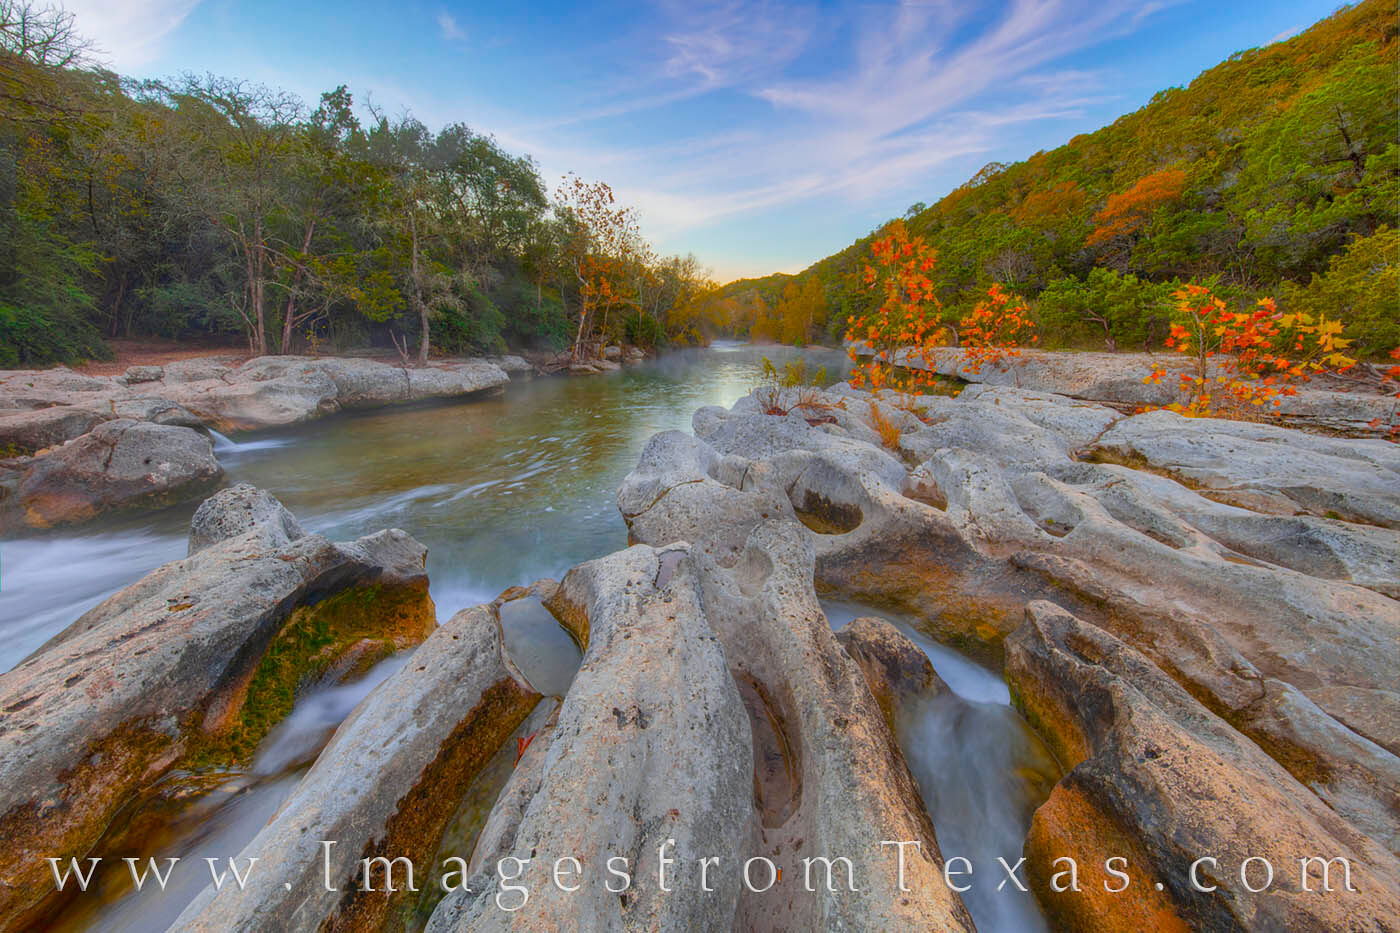 About 1.5 miles into the Barton Creek Greenbelt Trail, water flows over Sculpture Falls on a cold November morning. This is one...